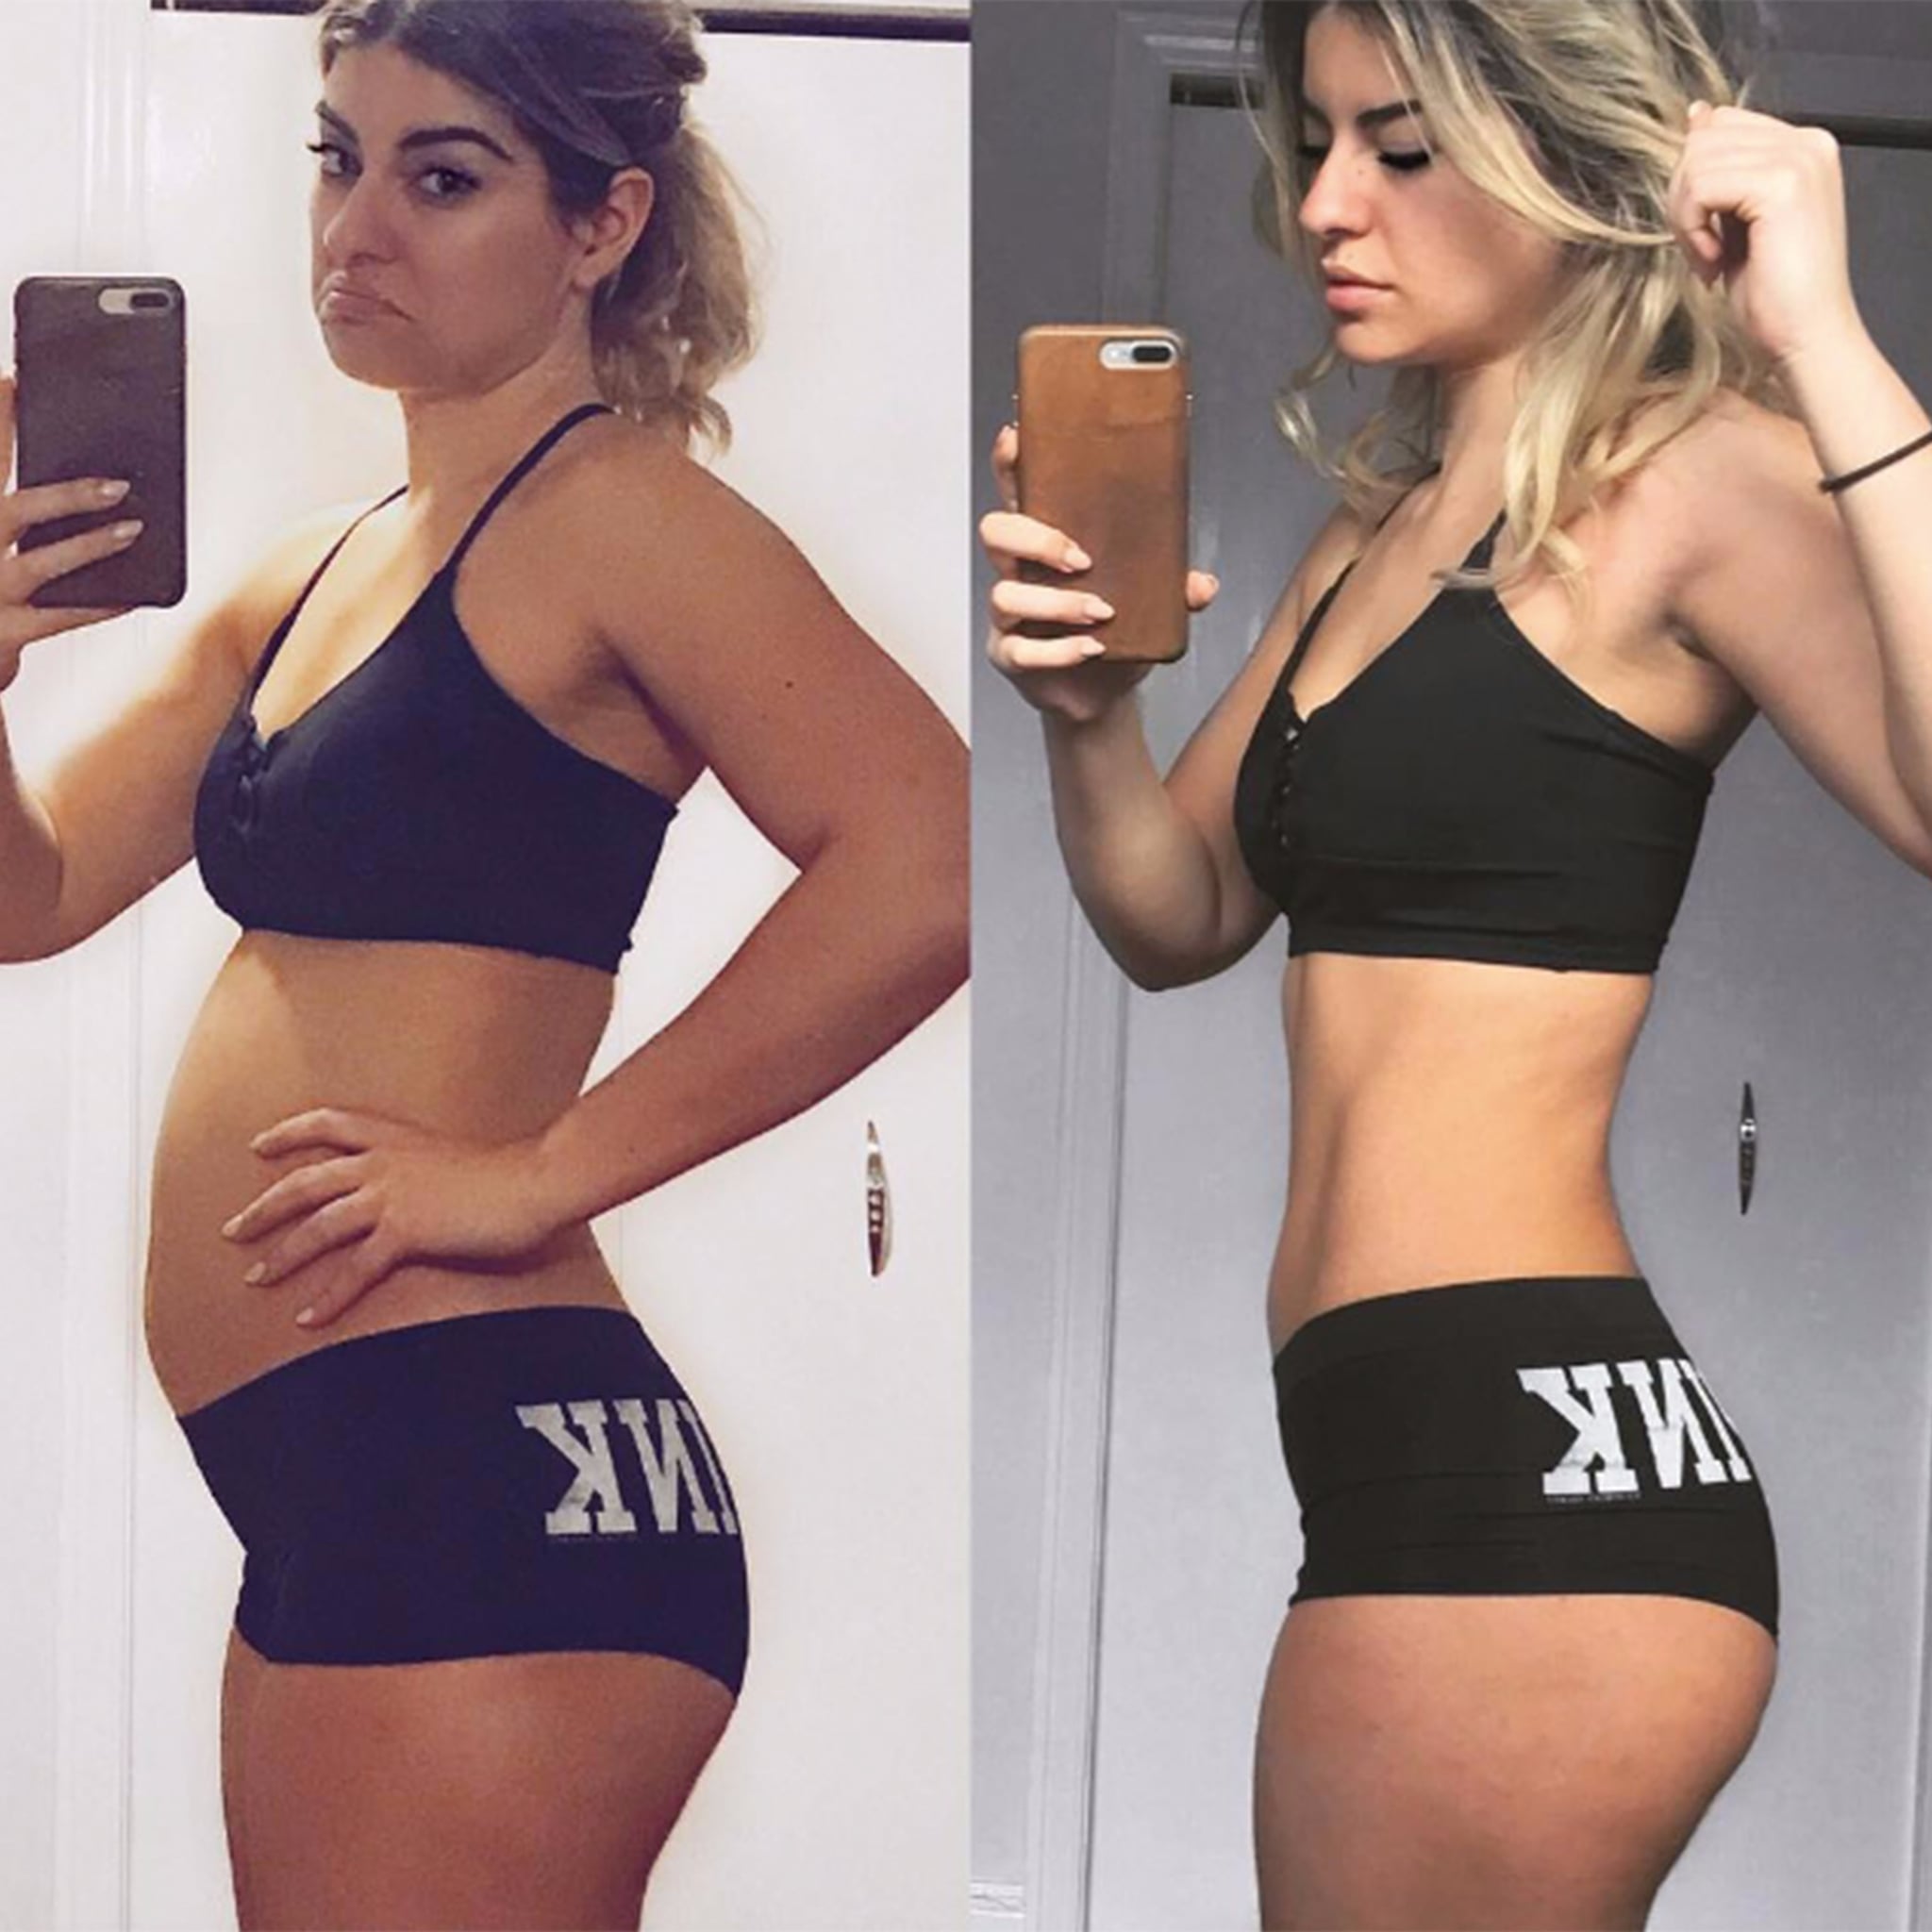 Trainer's Before-and-After Bloating Pictures on Instagram | POPSUGAR Fitness